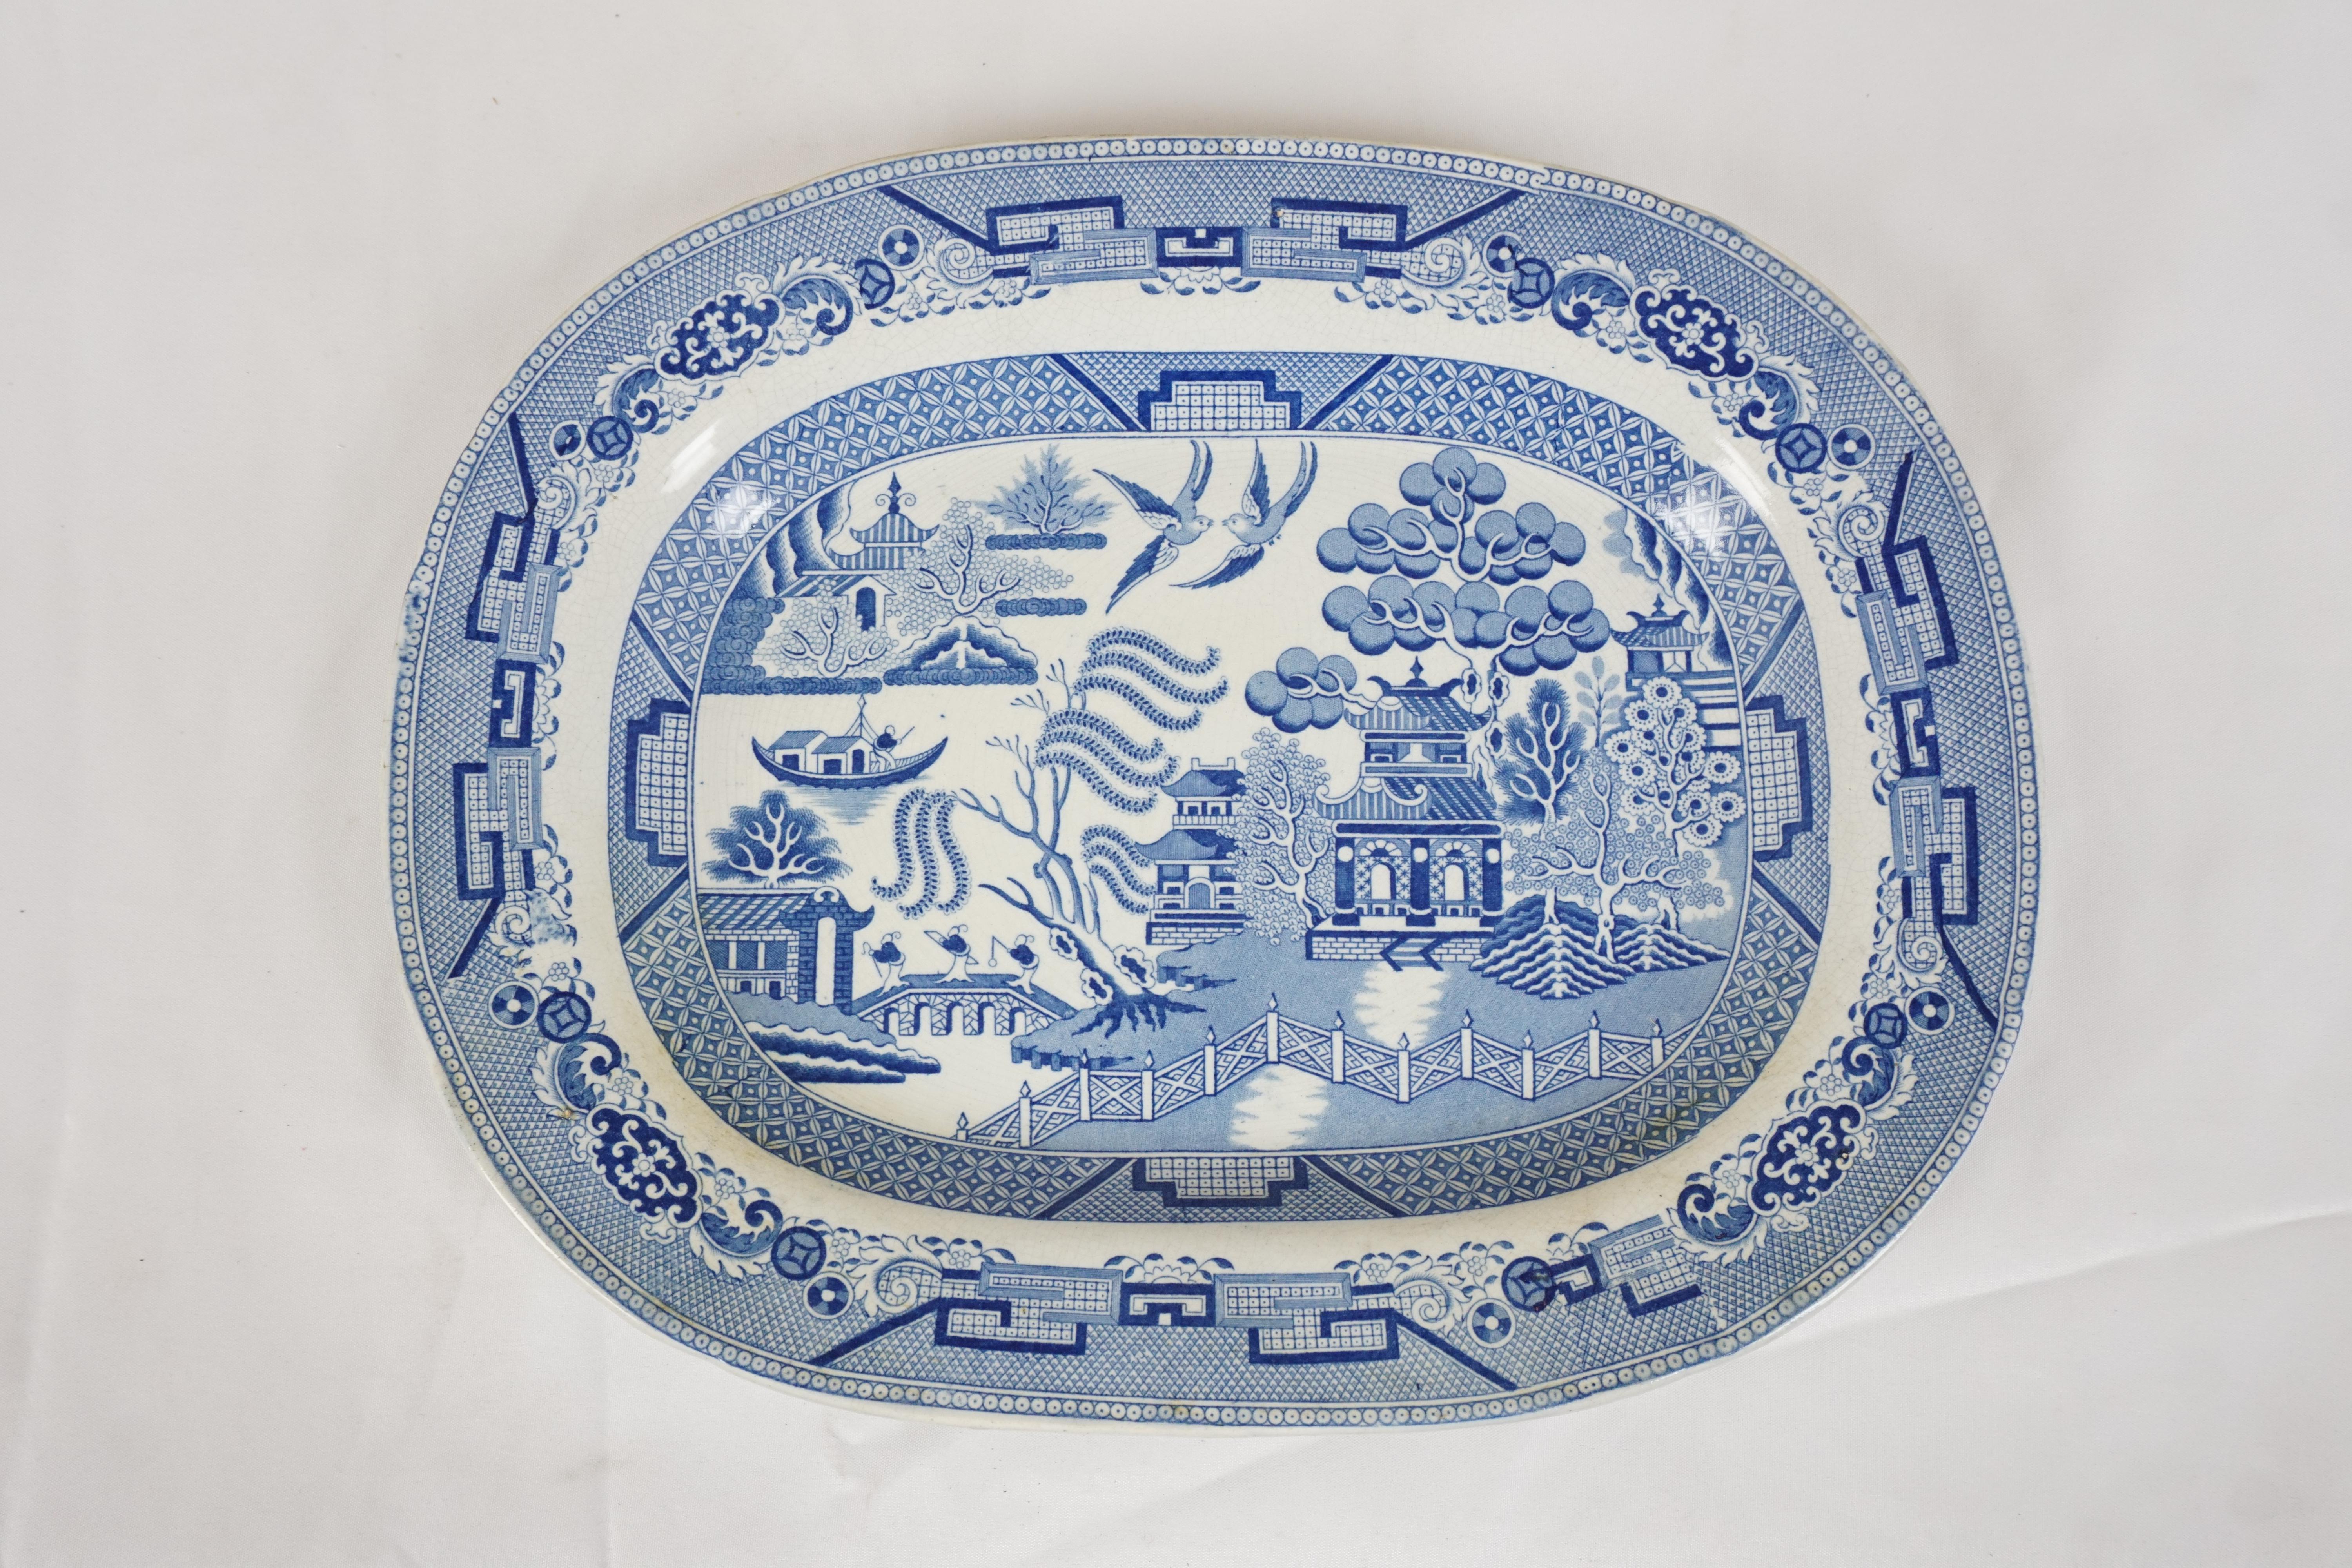 Mid 19th Century Pearlware Blue Willow Transfer platter, England 1840, H629

England 1890
Tree has well shaped impression into the body and has a blue and white pattern
Vivid colors
Marked on the underside
Very faint crack